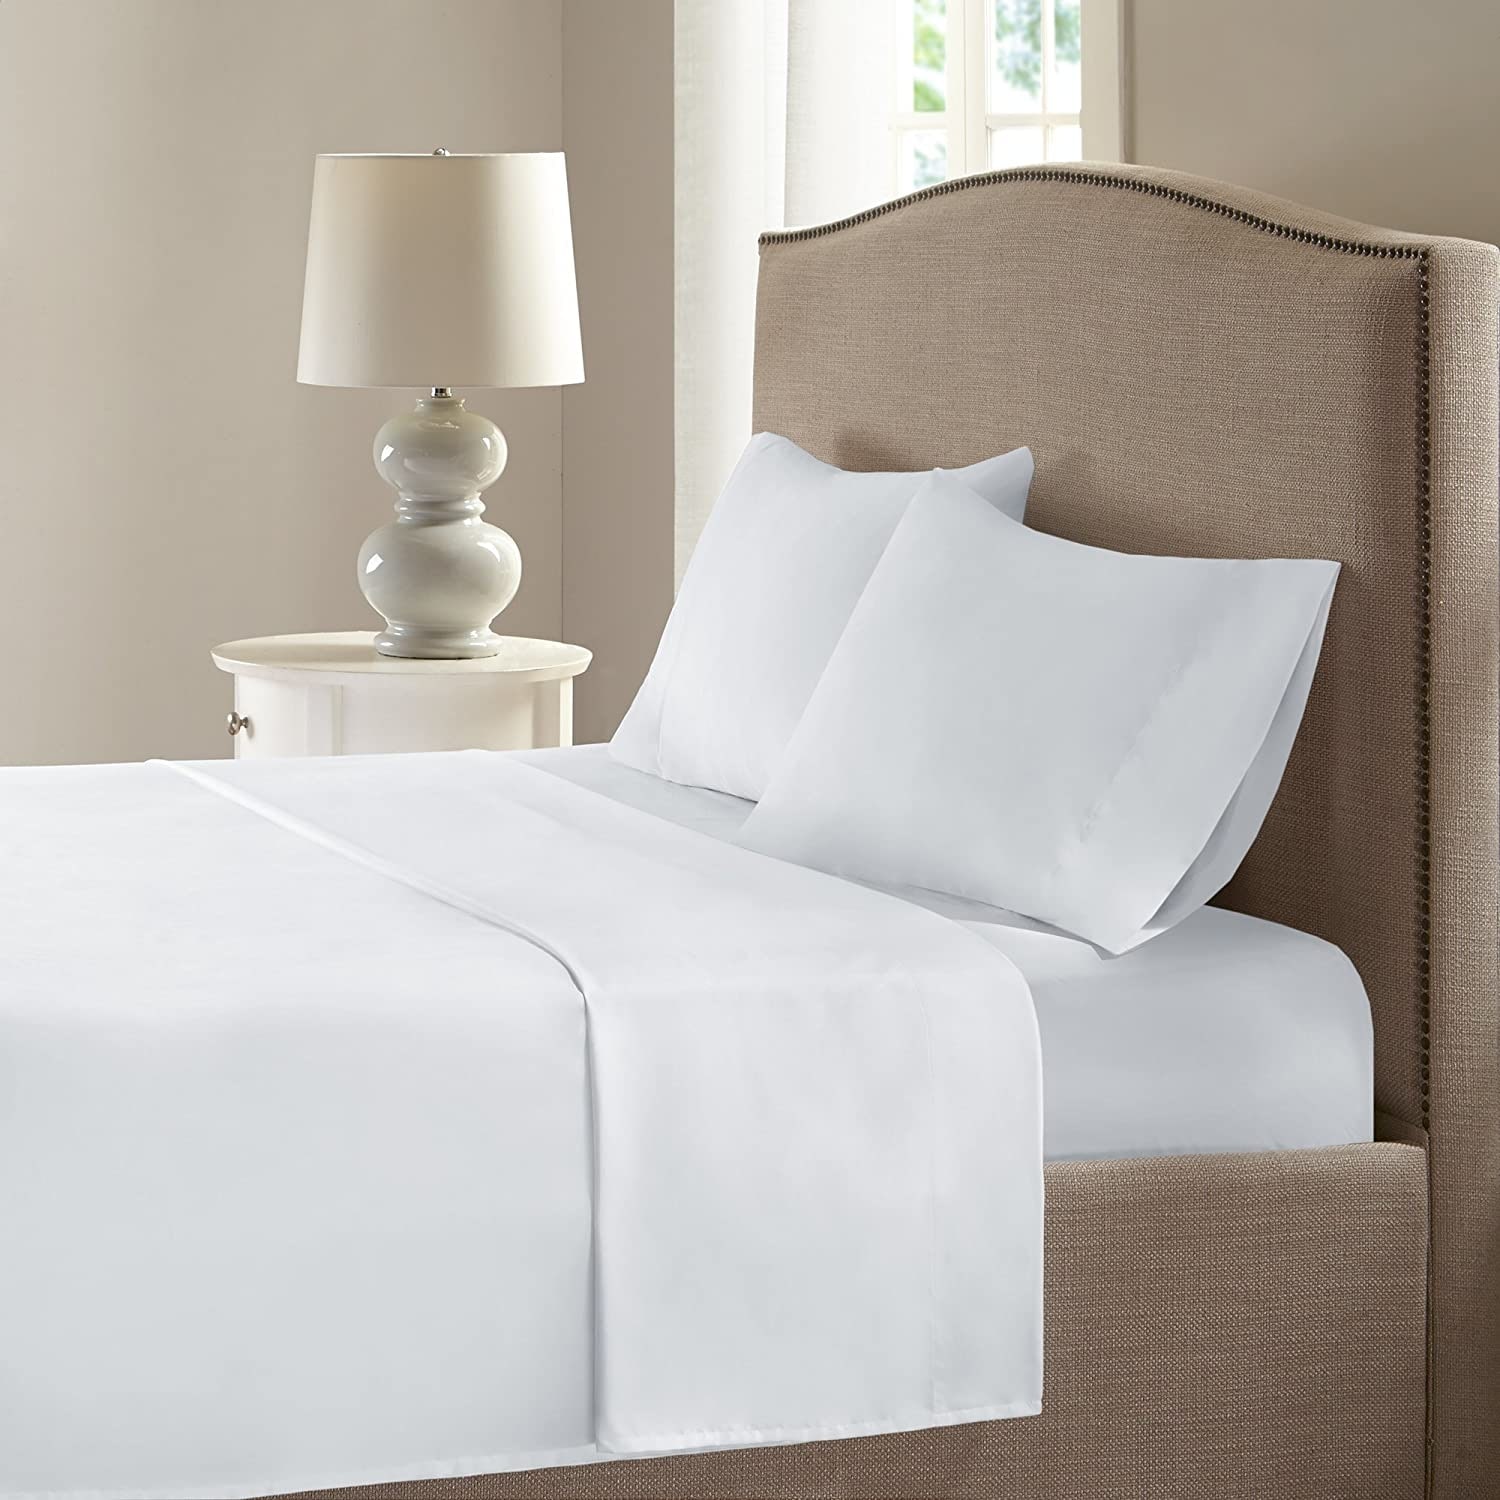 Pima Cotton Bed Sheets and Pillowcases - Bed Bath & Beyond